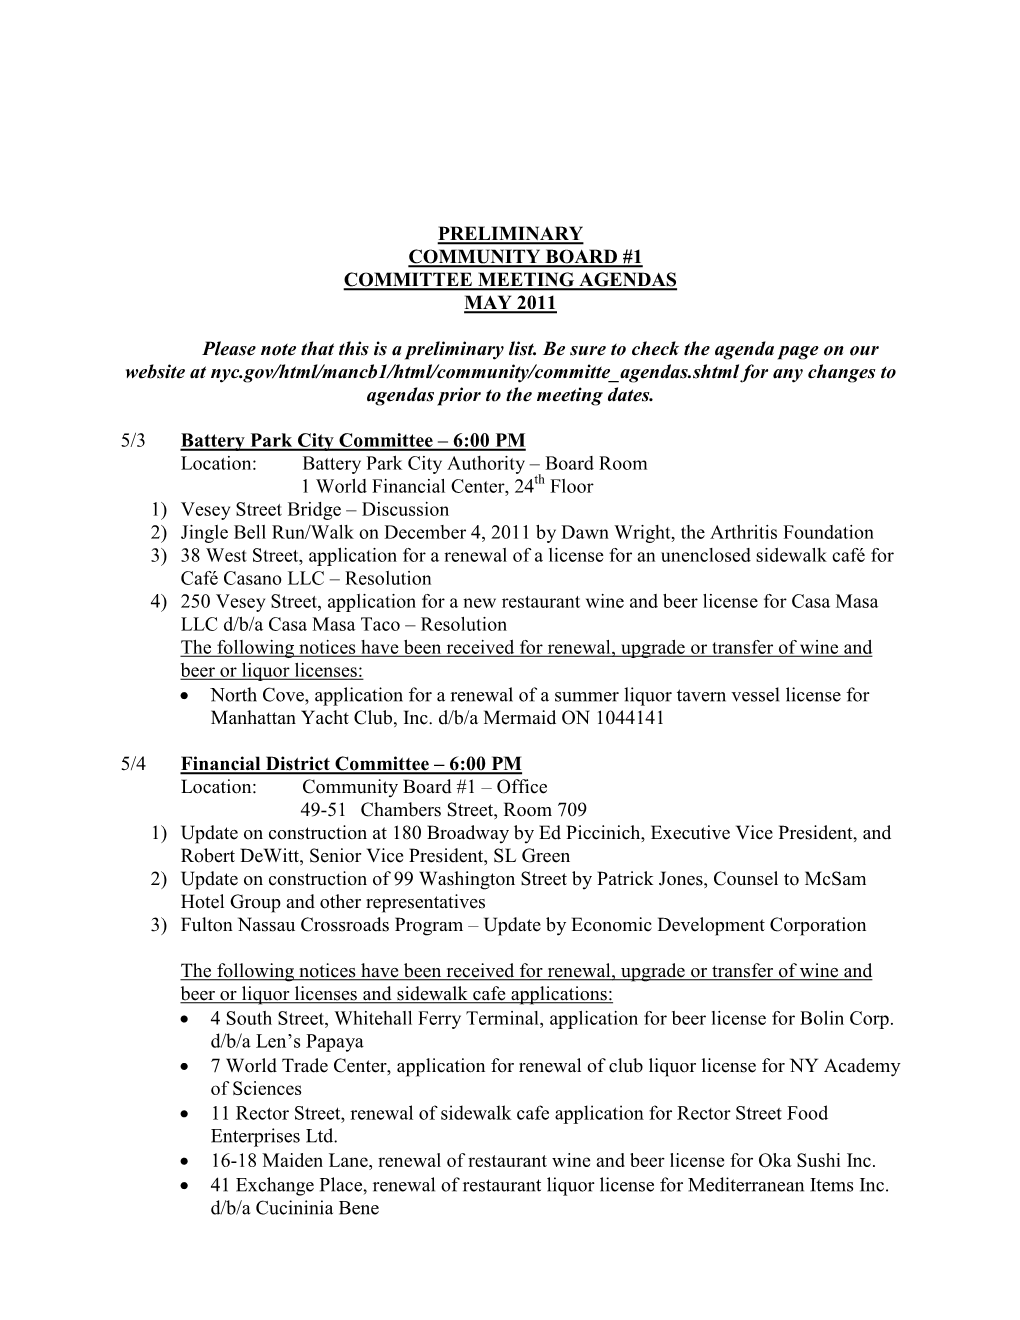 PRELIMINARY COMMUNITY BOARD #1 COMMITTEE MEETING AGENDAS MAY 2011 Please Note That This Is a Preliminary List. Be Sure to Check